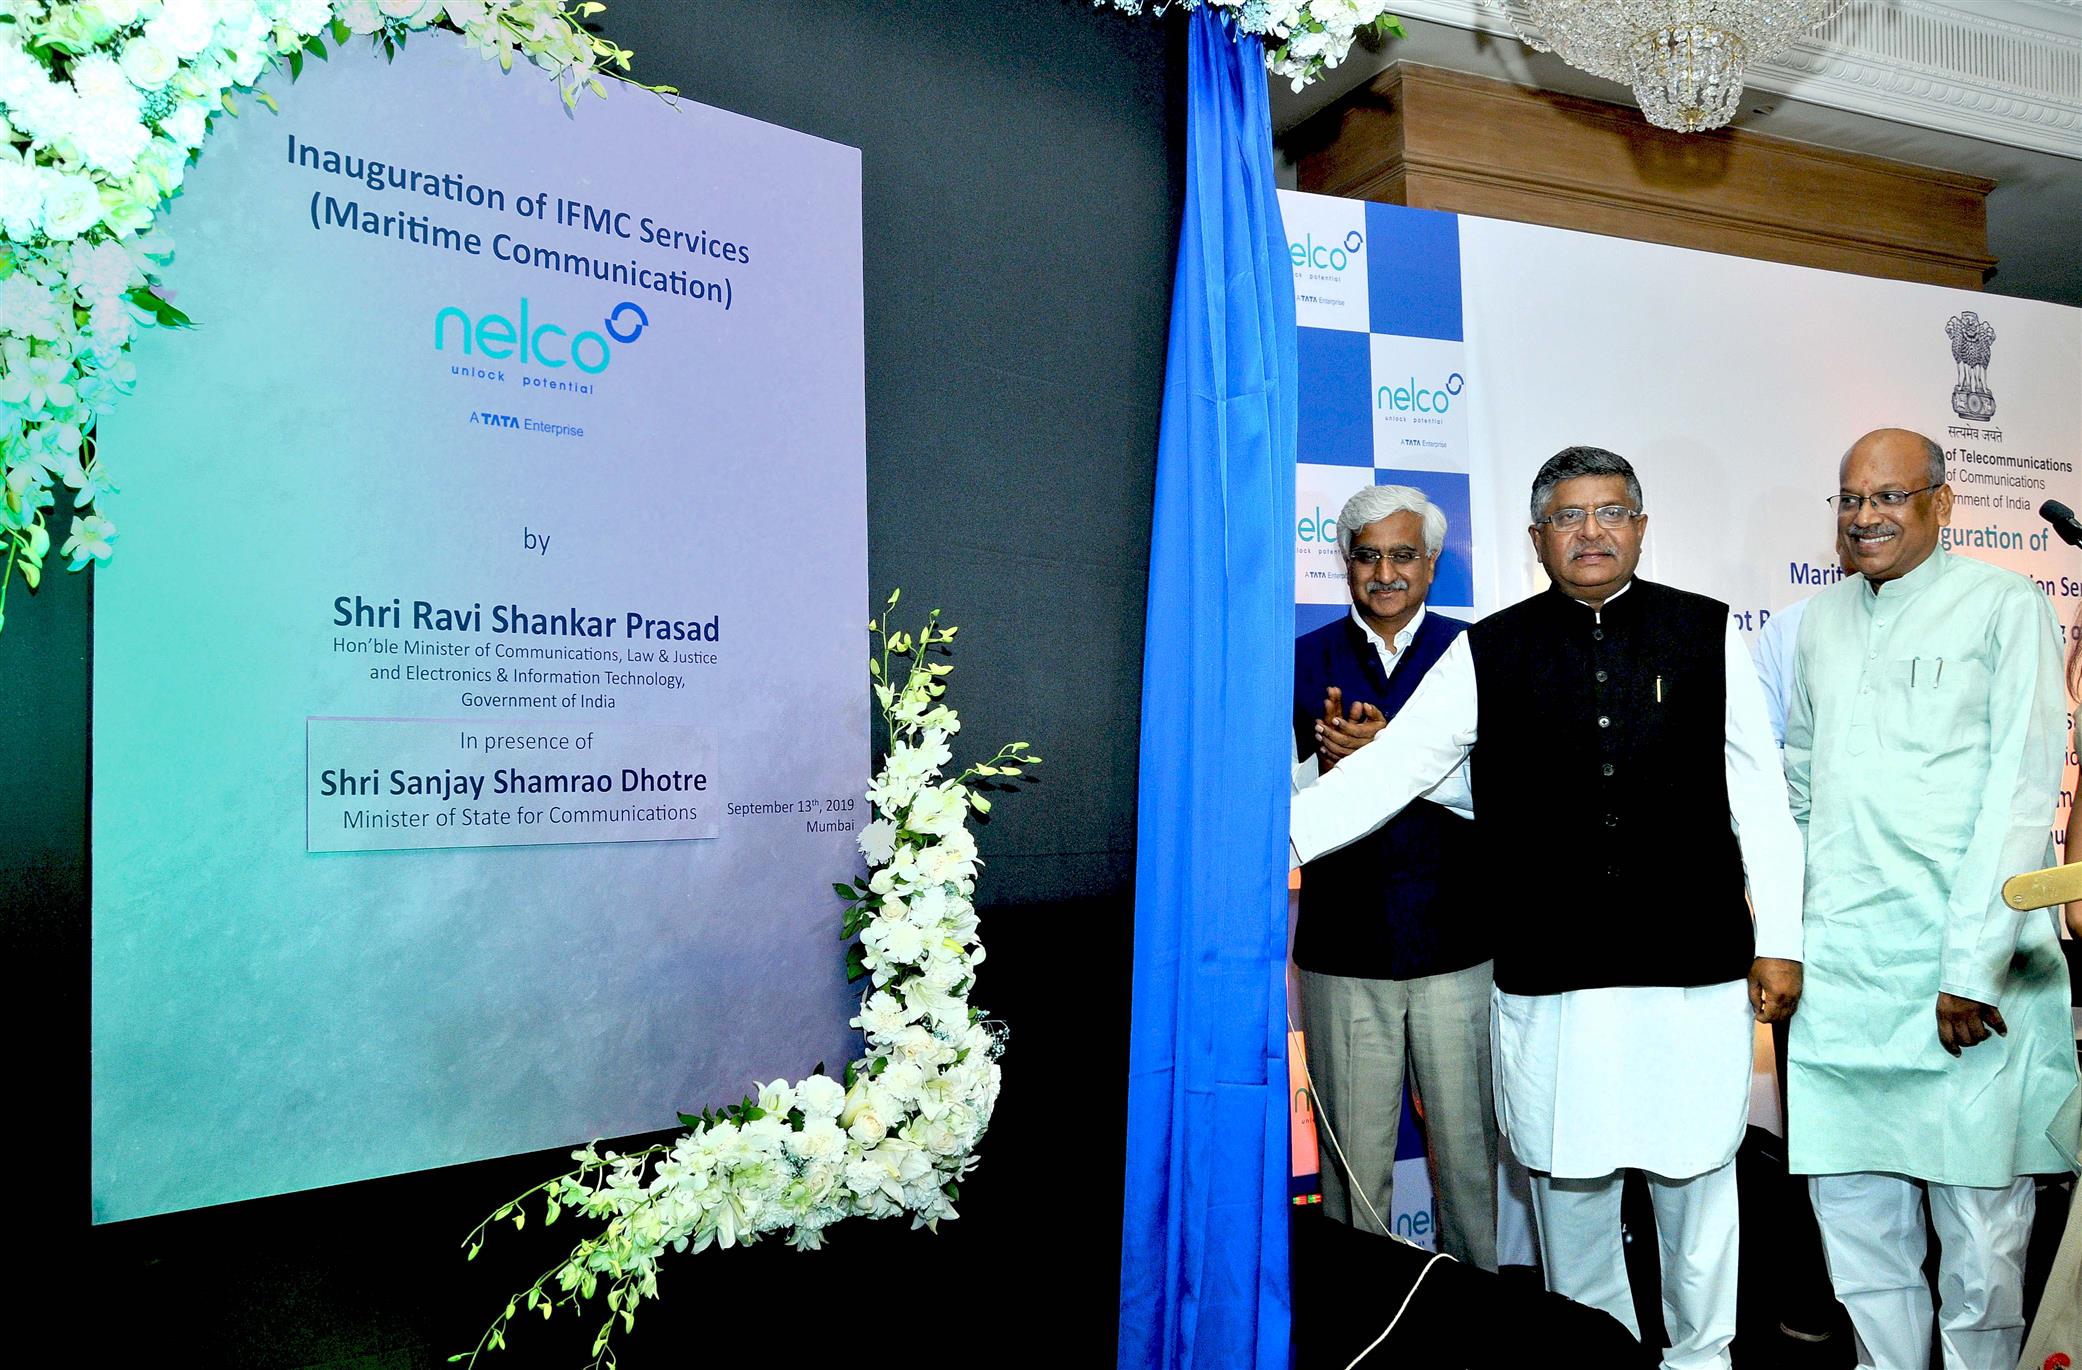 Union Minister for IT and Communication, Law and Justice and Electronics Shri Ravi Shankar Prasad unveiling the plaque to inaugurate Maritime Telecommunication Service & Pilot Project in Maharashtra for Tracing stolen mobiles in Mumbai on September 13, 2019. MoS for Communication Shri Sanjay Shamrao Dhotre also present.